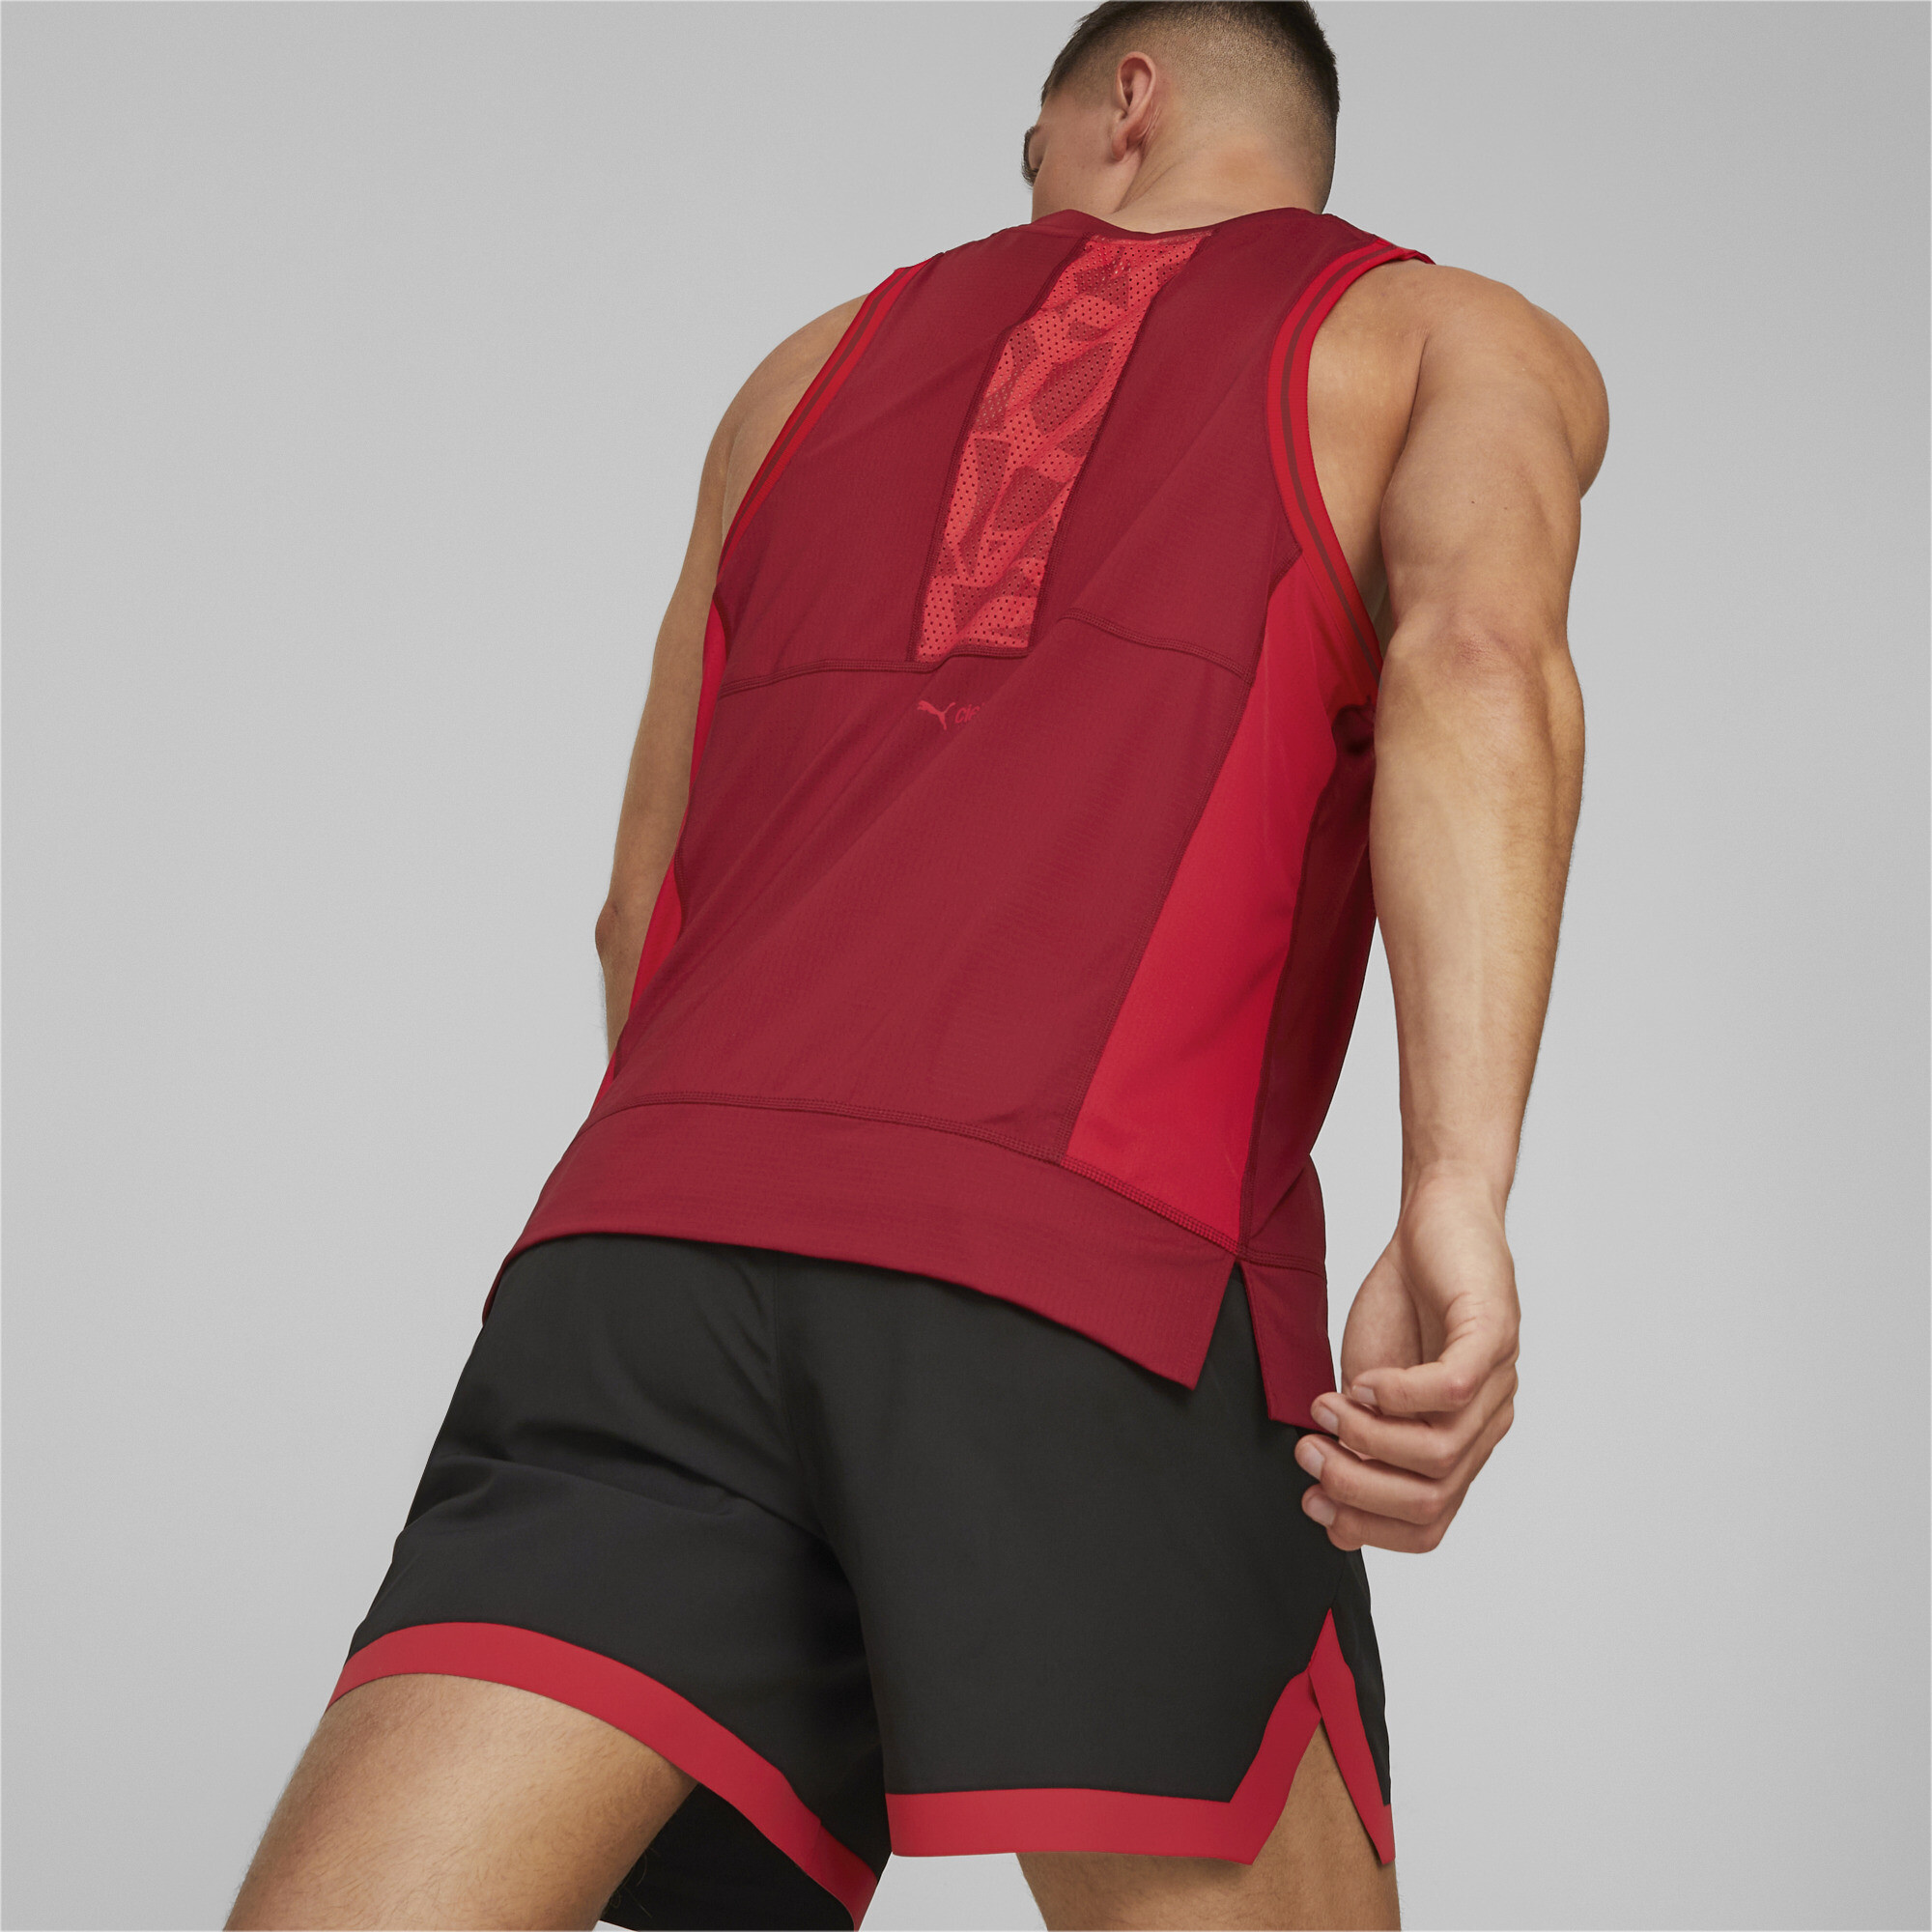 Men's PUMA X CIELE Running Singlet In Red, Size Small